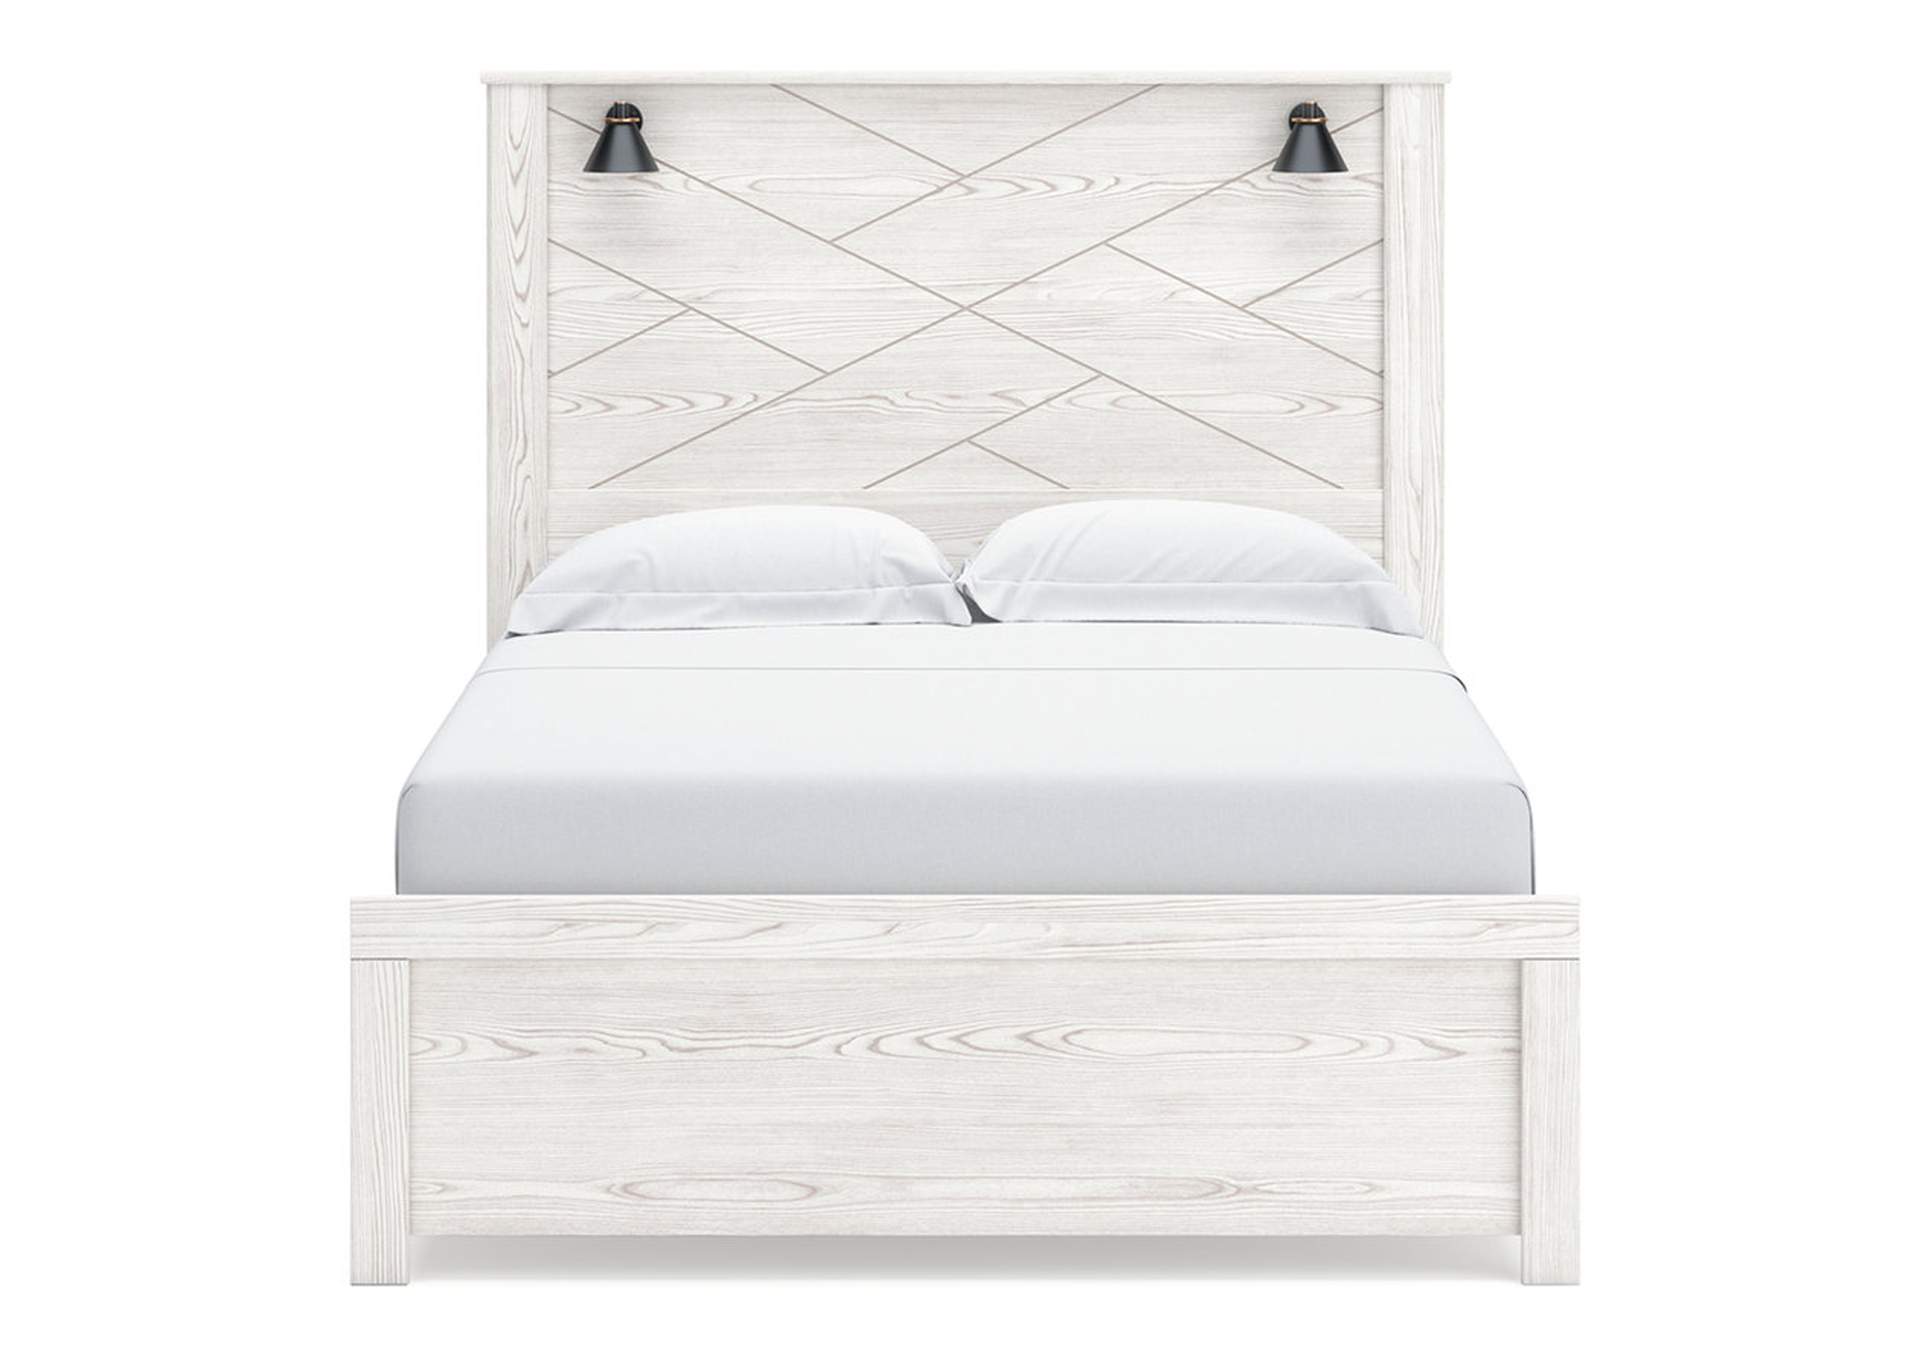 Gerridan Queen Panel Bed, Dresser, Chest and Nightstand,Signature Design By Ashley